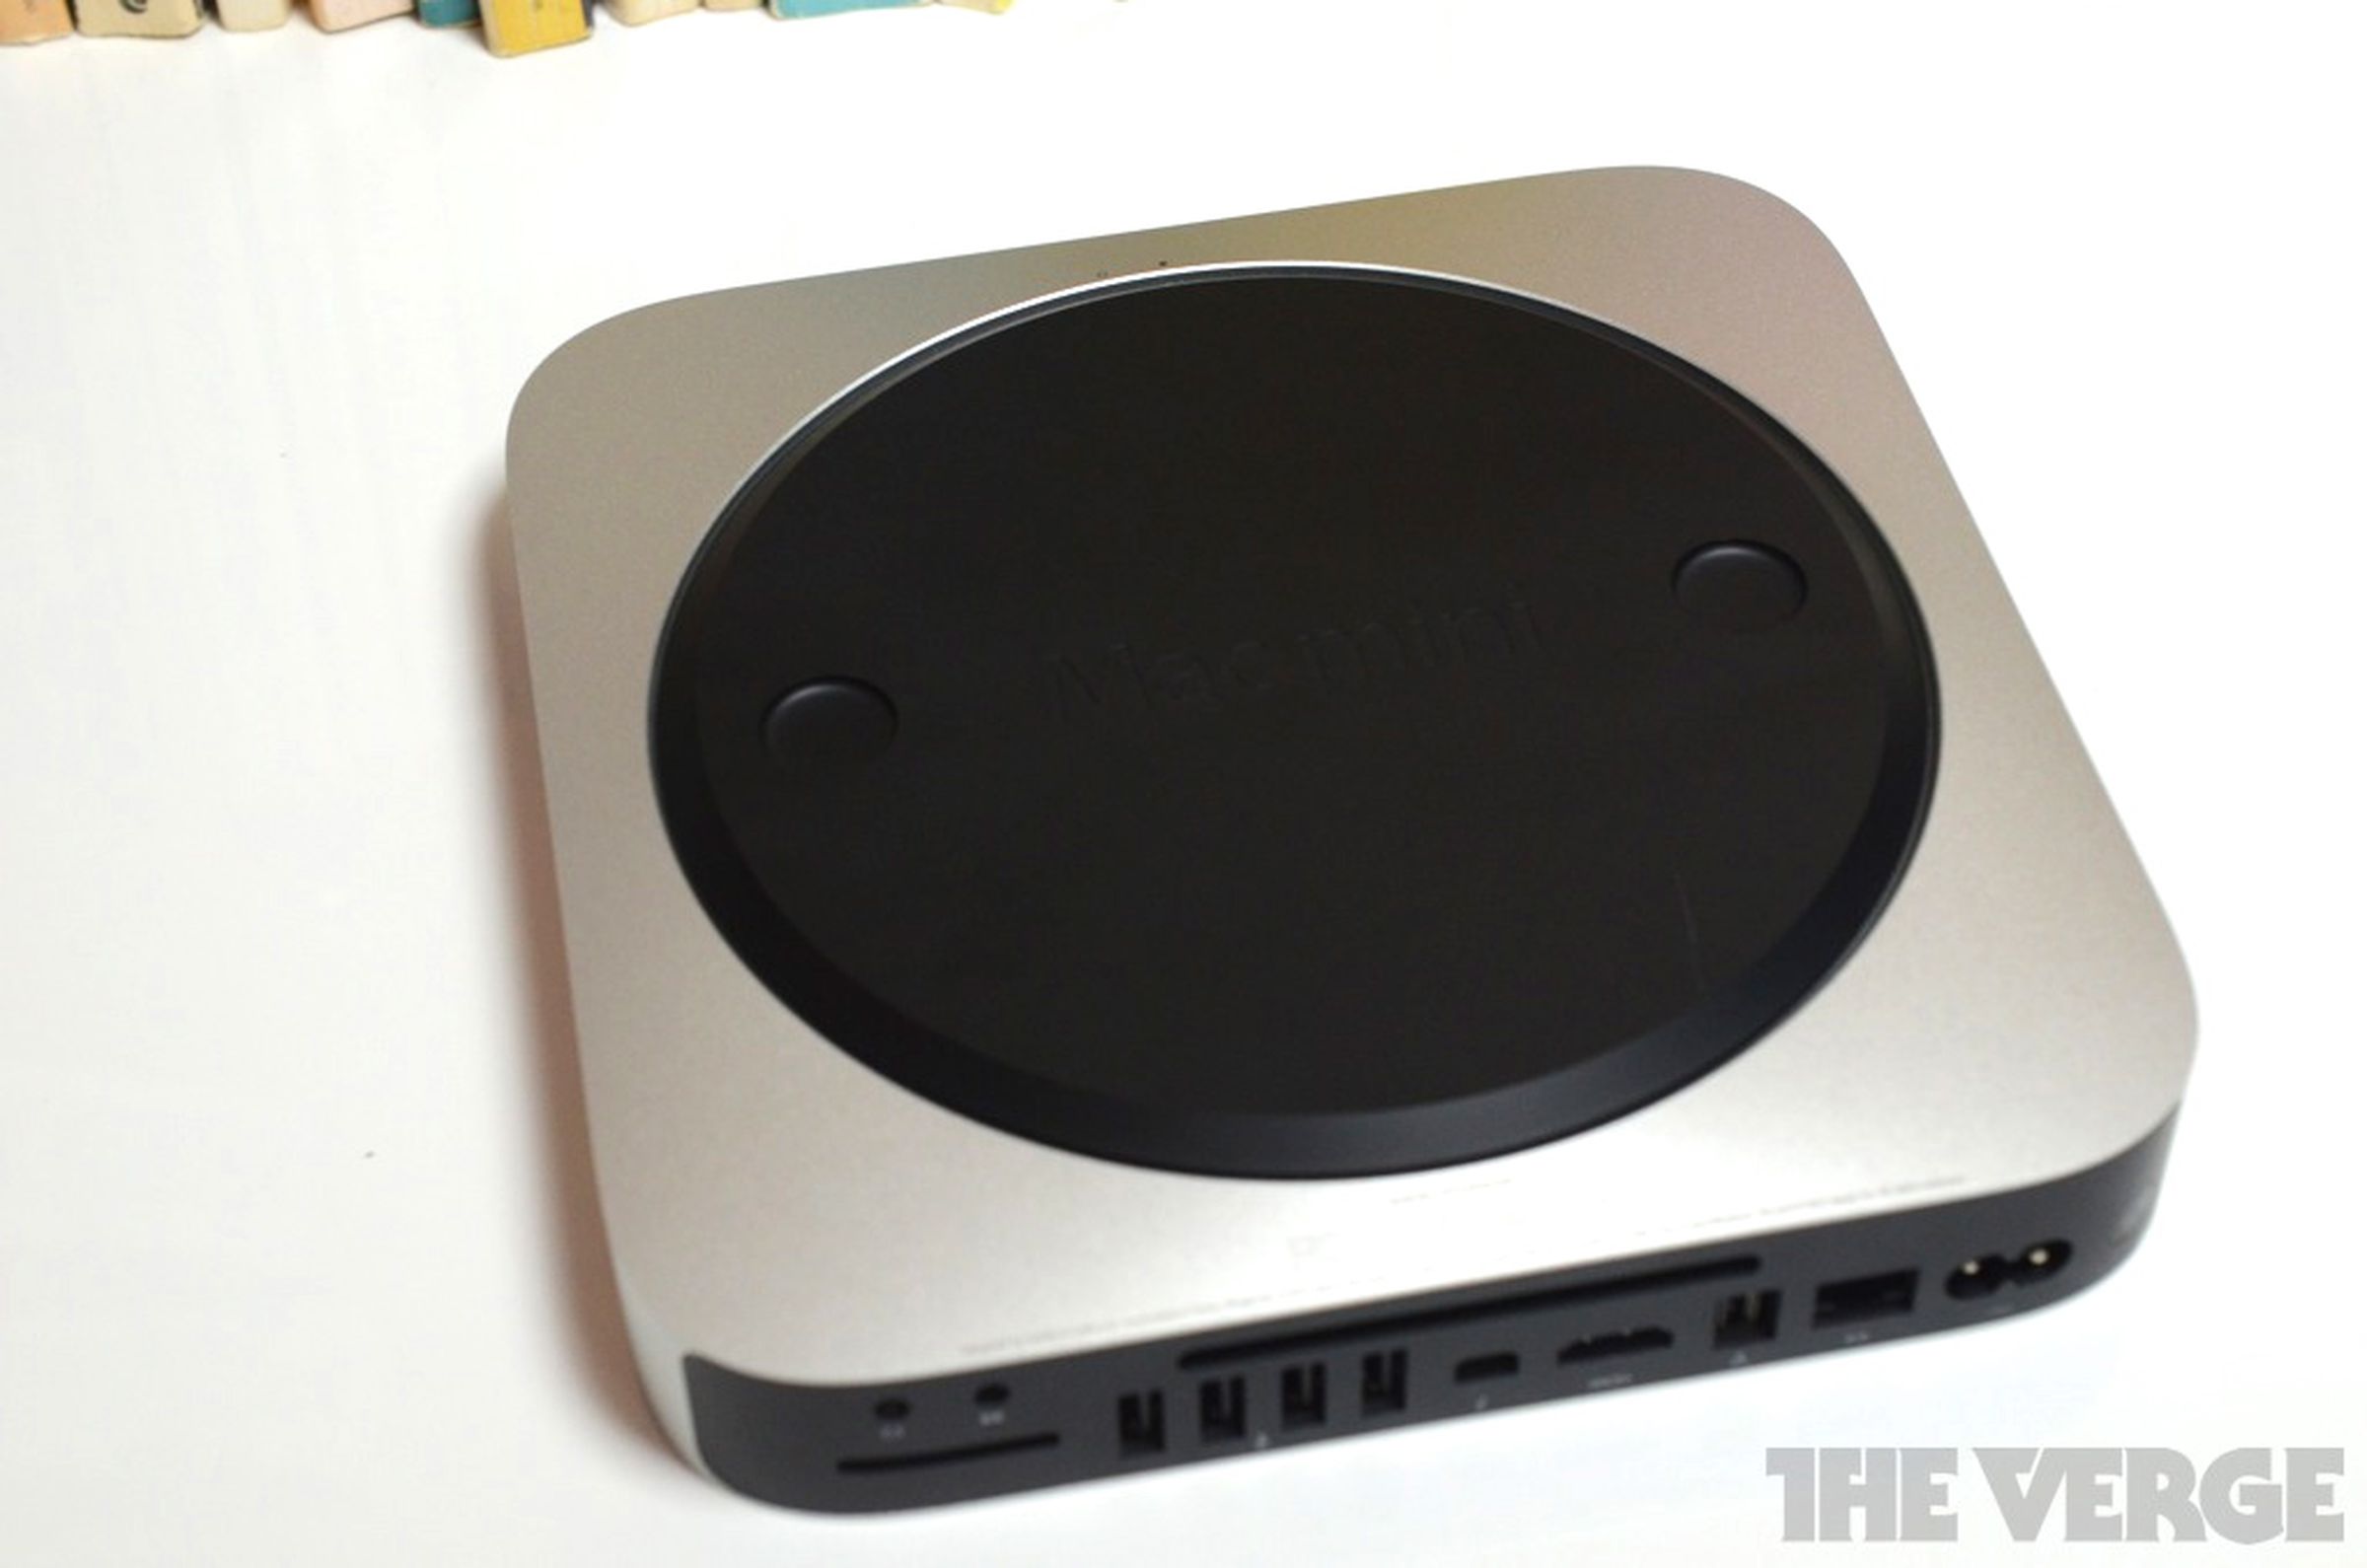 Apple Mac mini and iMac pictures (late 2012) 